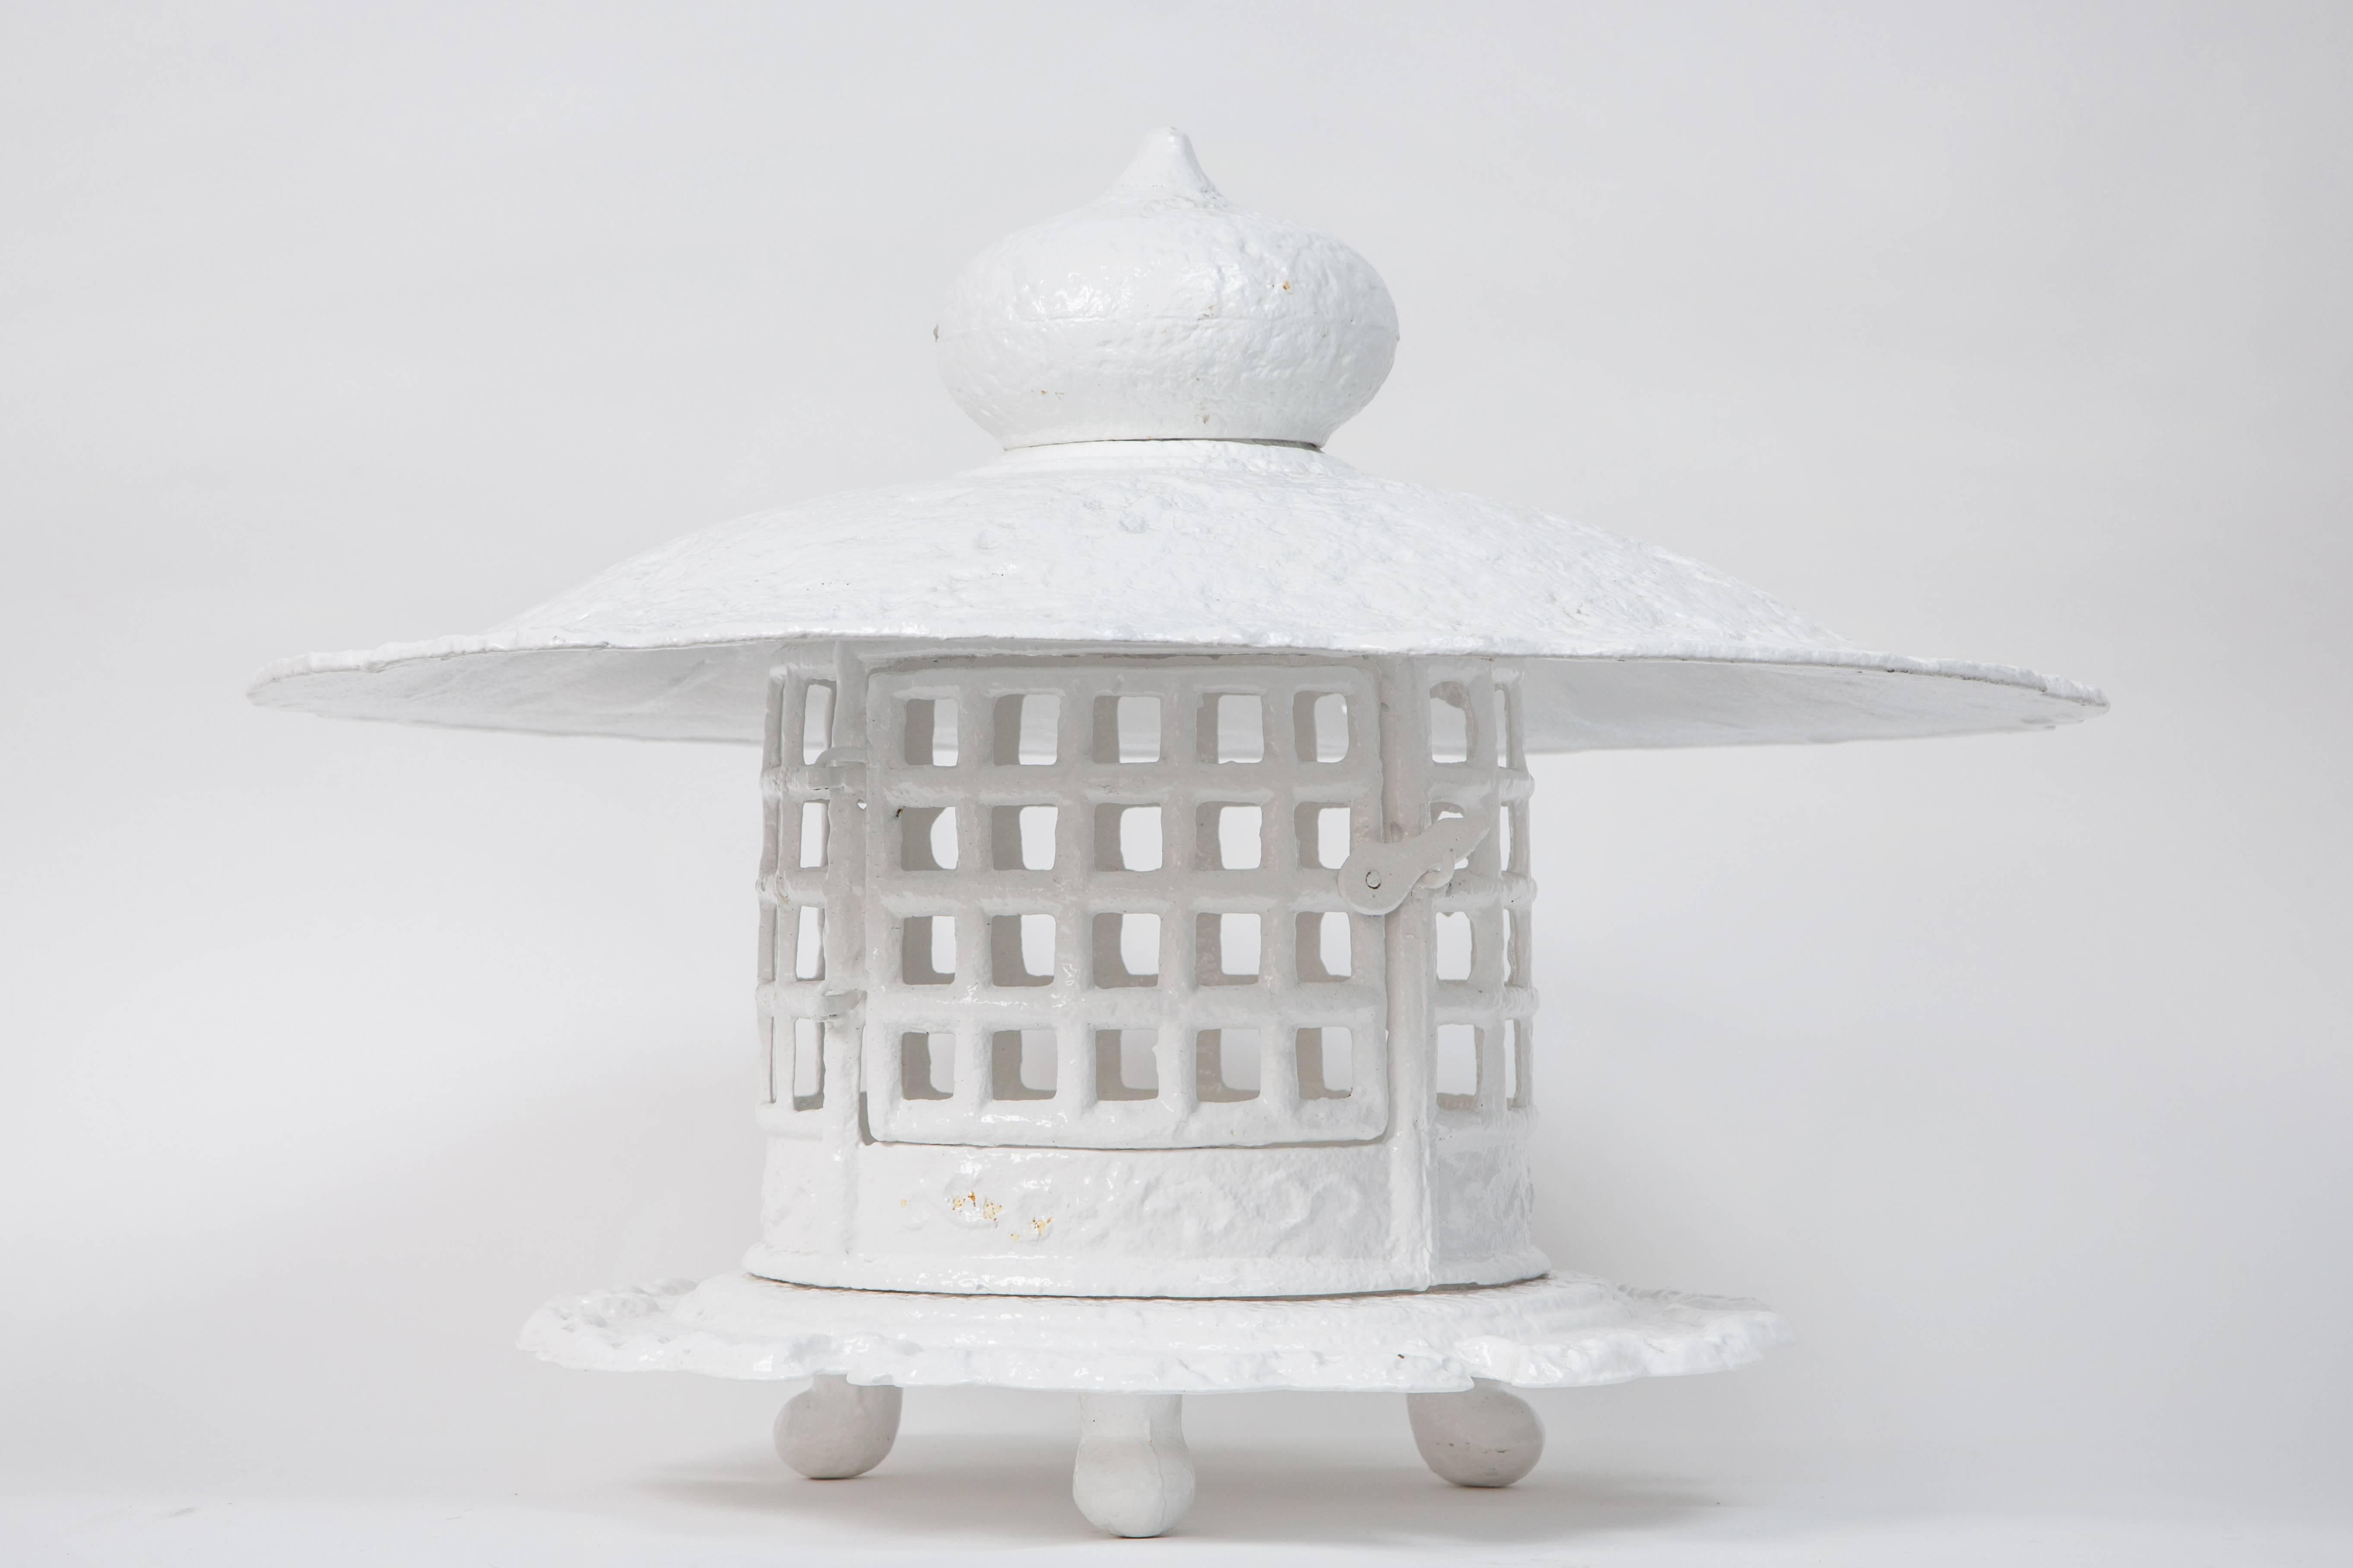 Striking 1960s cast iron pagoda re-imagined in white hi-gloss lacquer. Fabulous touch of chinoiserie for any decor.